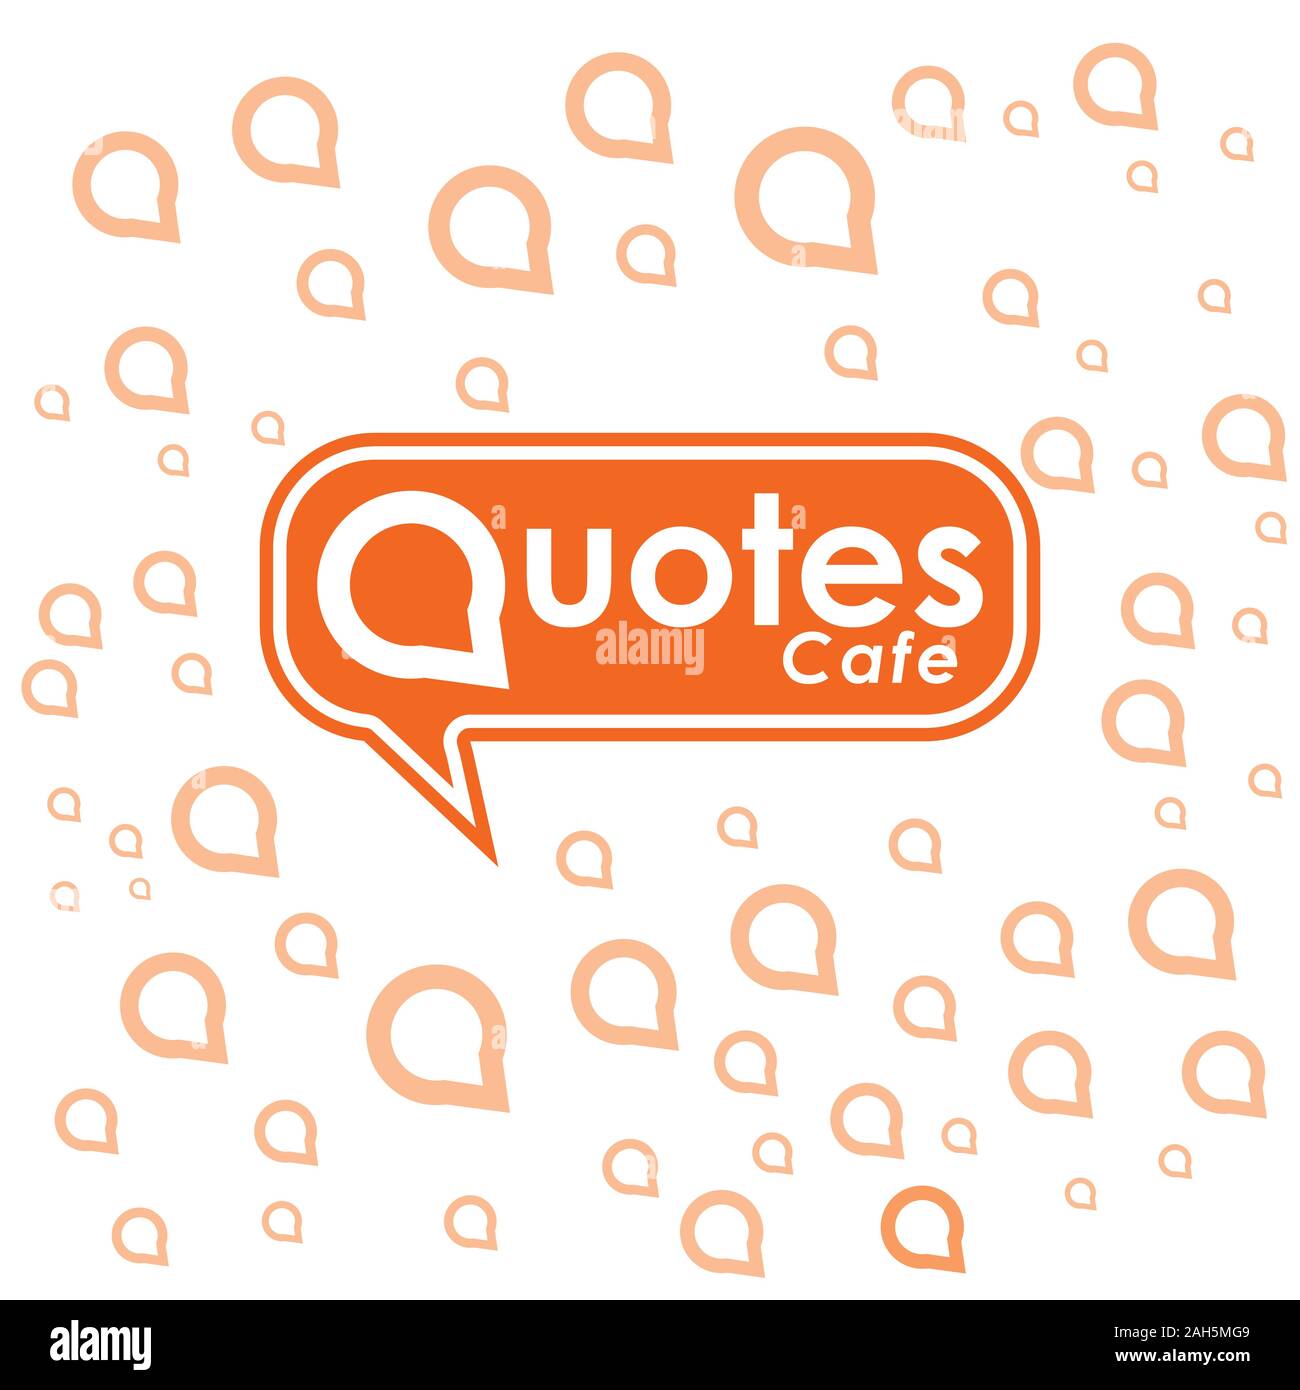 Quotes Cafe Logo Design Template, Call Out Logo Concept, Orange, White, Call Out Decoration Stock Vector